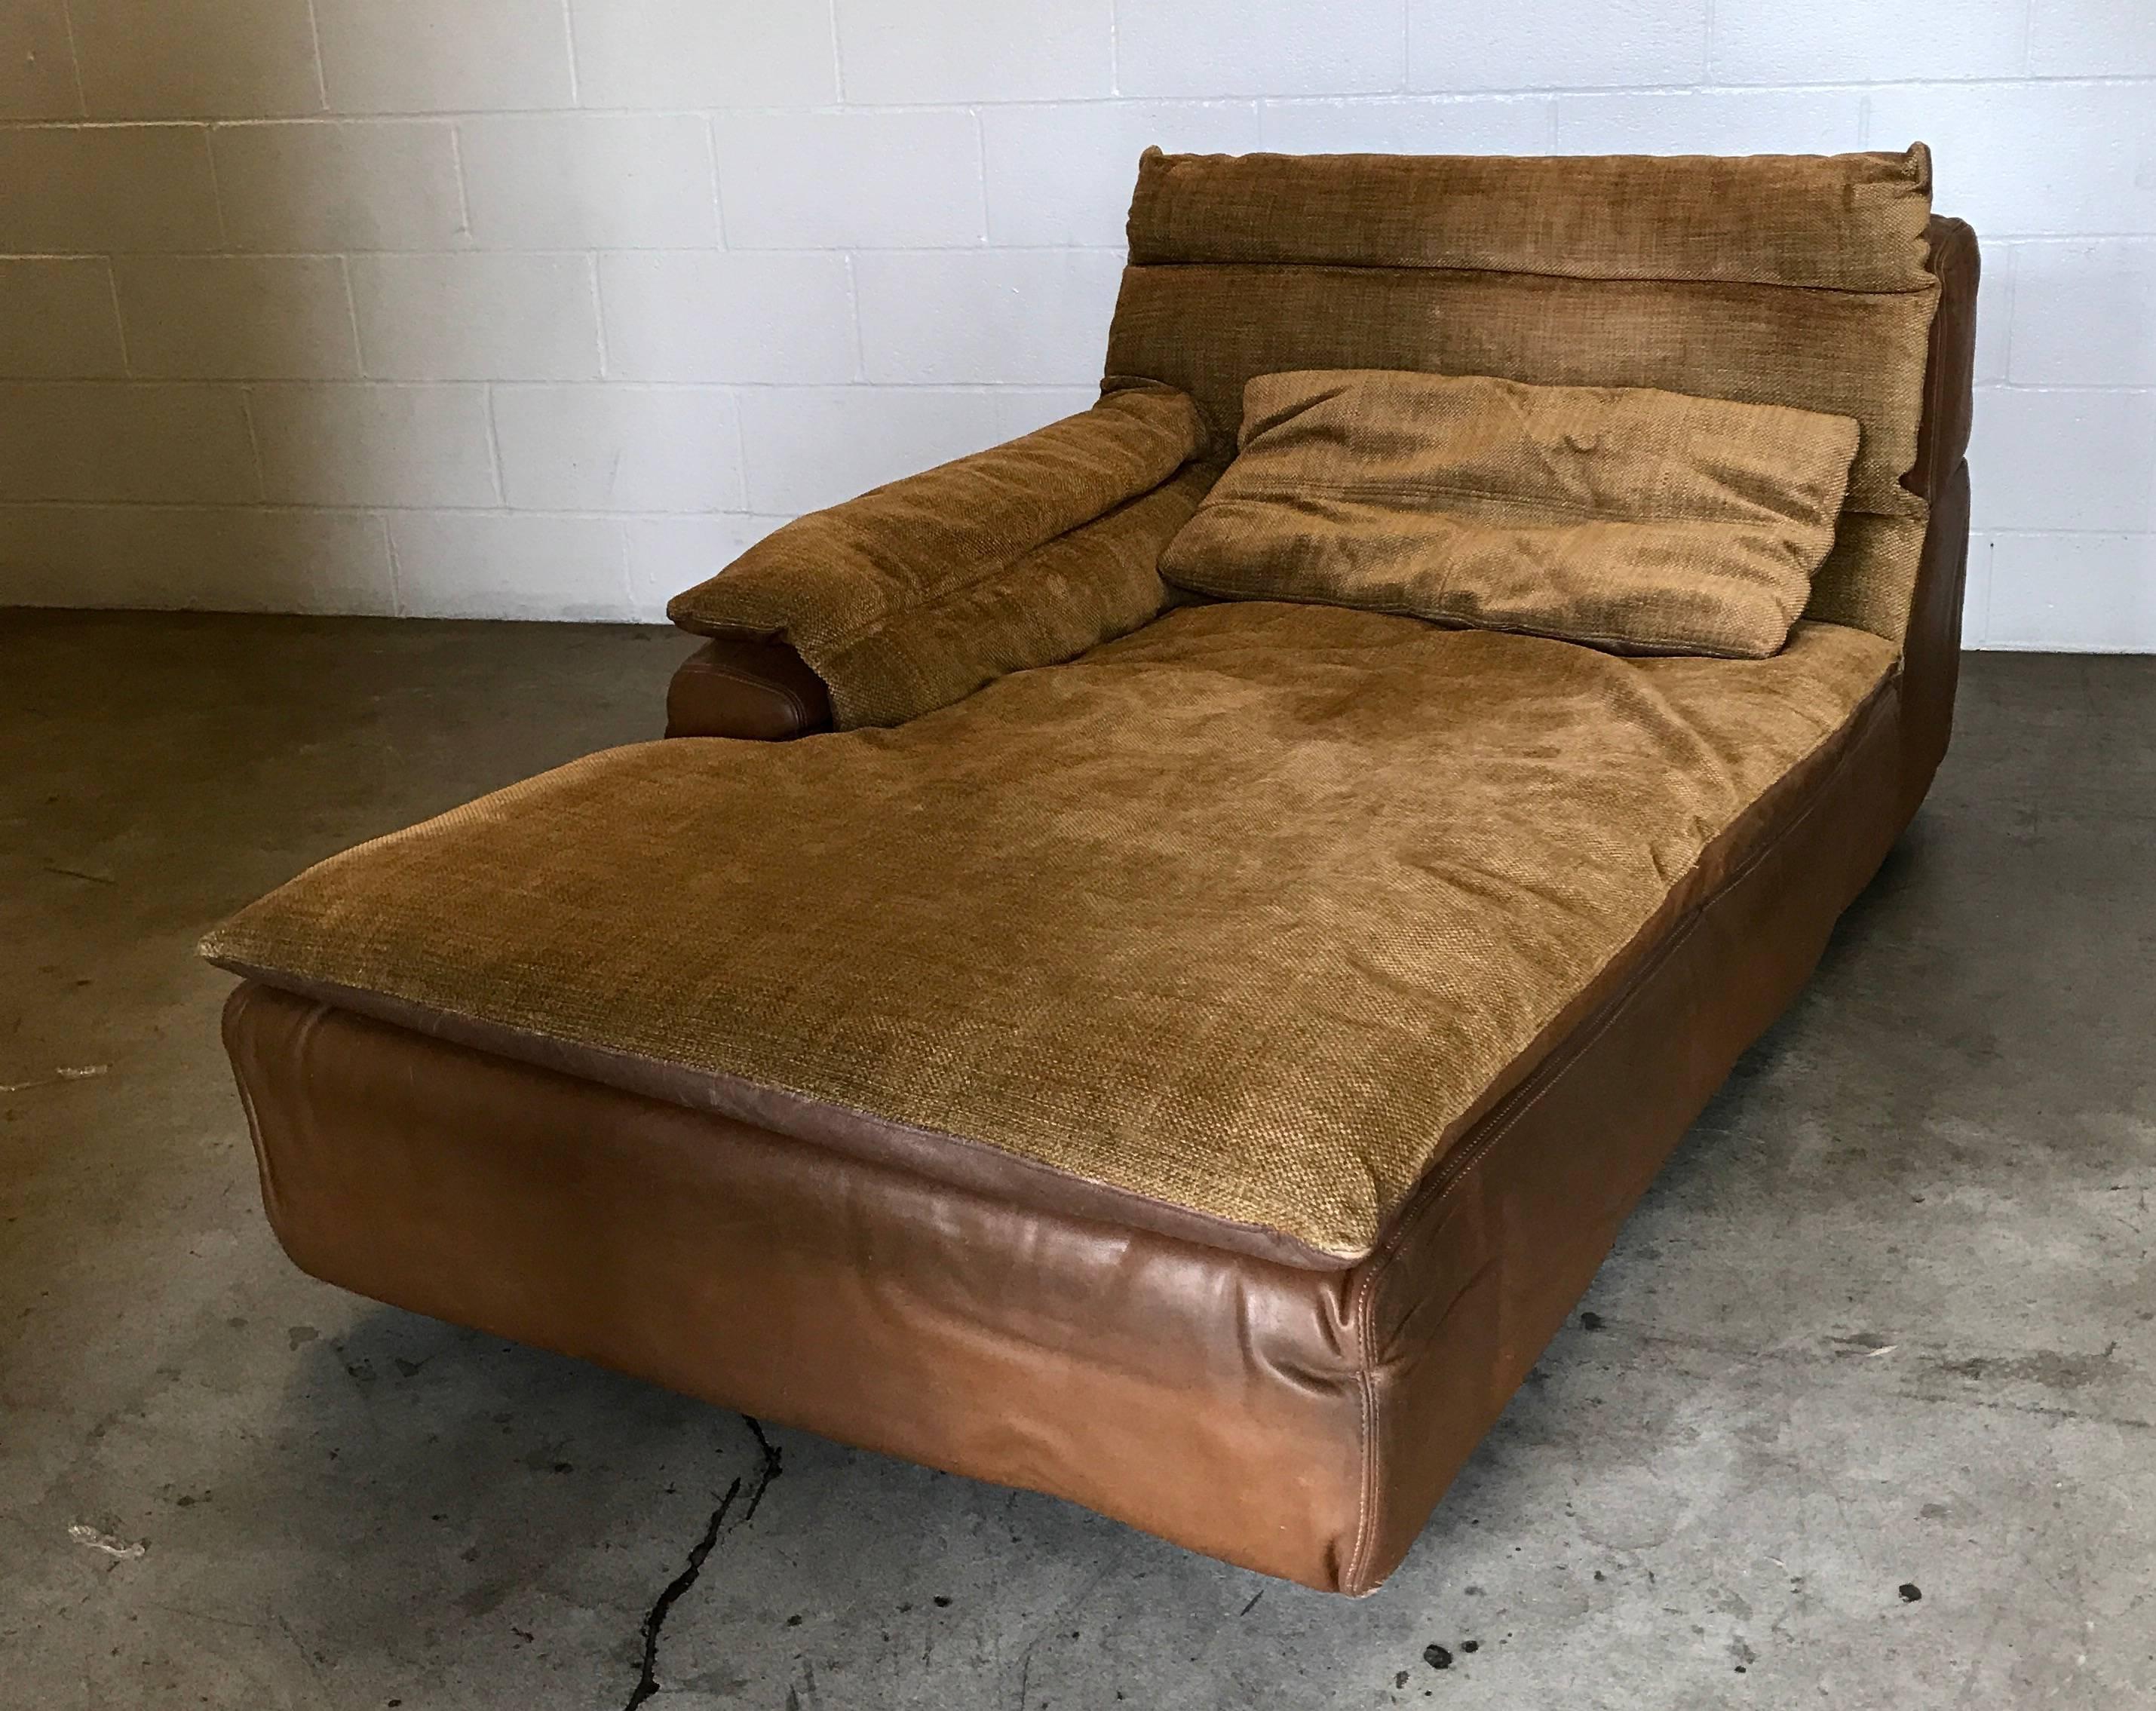 Glamorous suede leather daybed signed by Rossi di Albizzate.
Leather and suede by Borbonese.